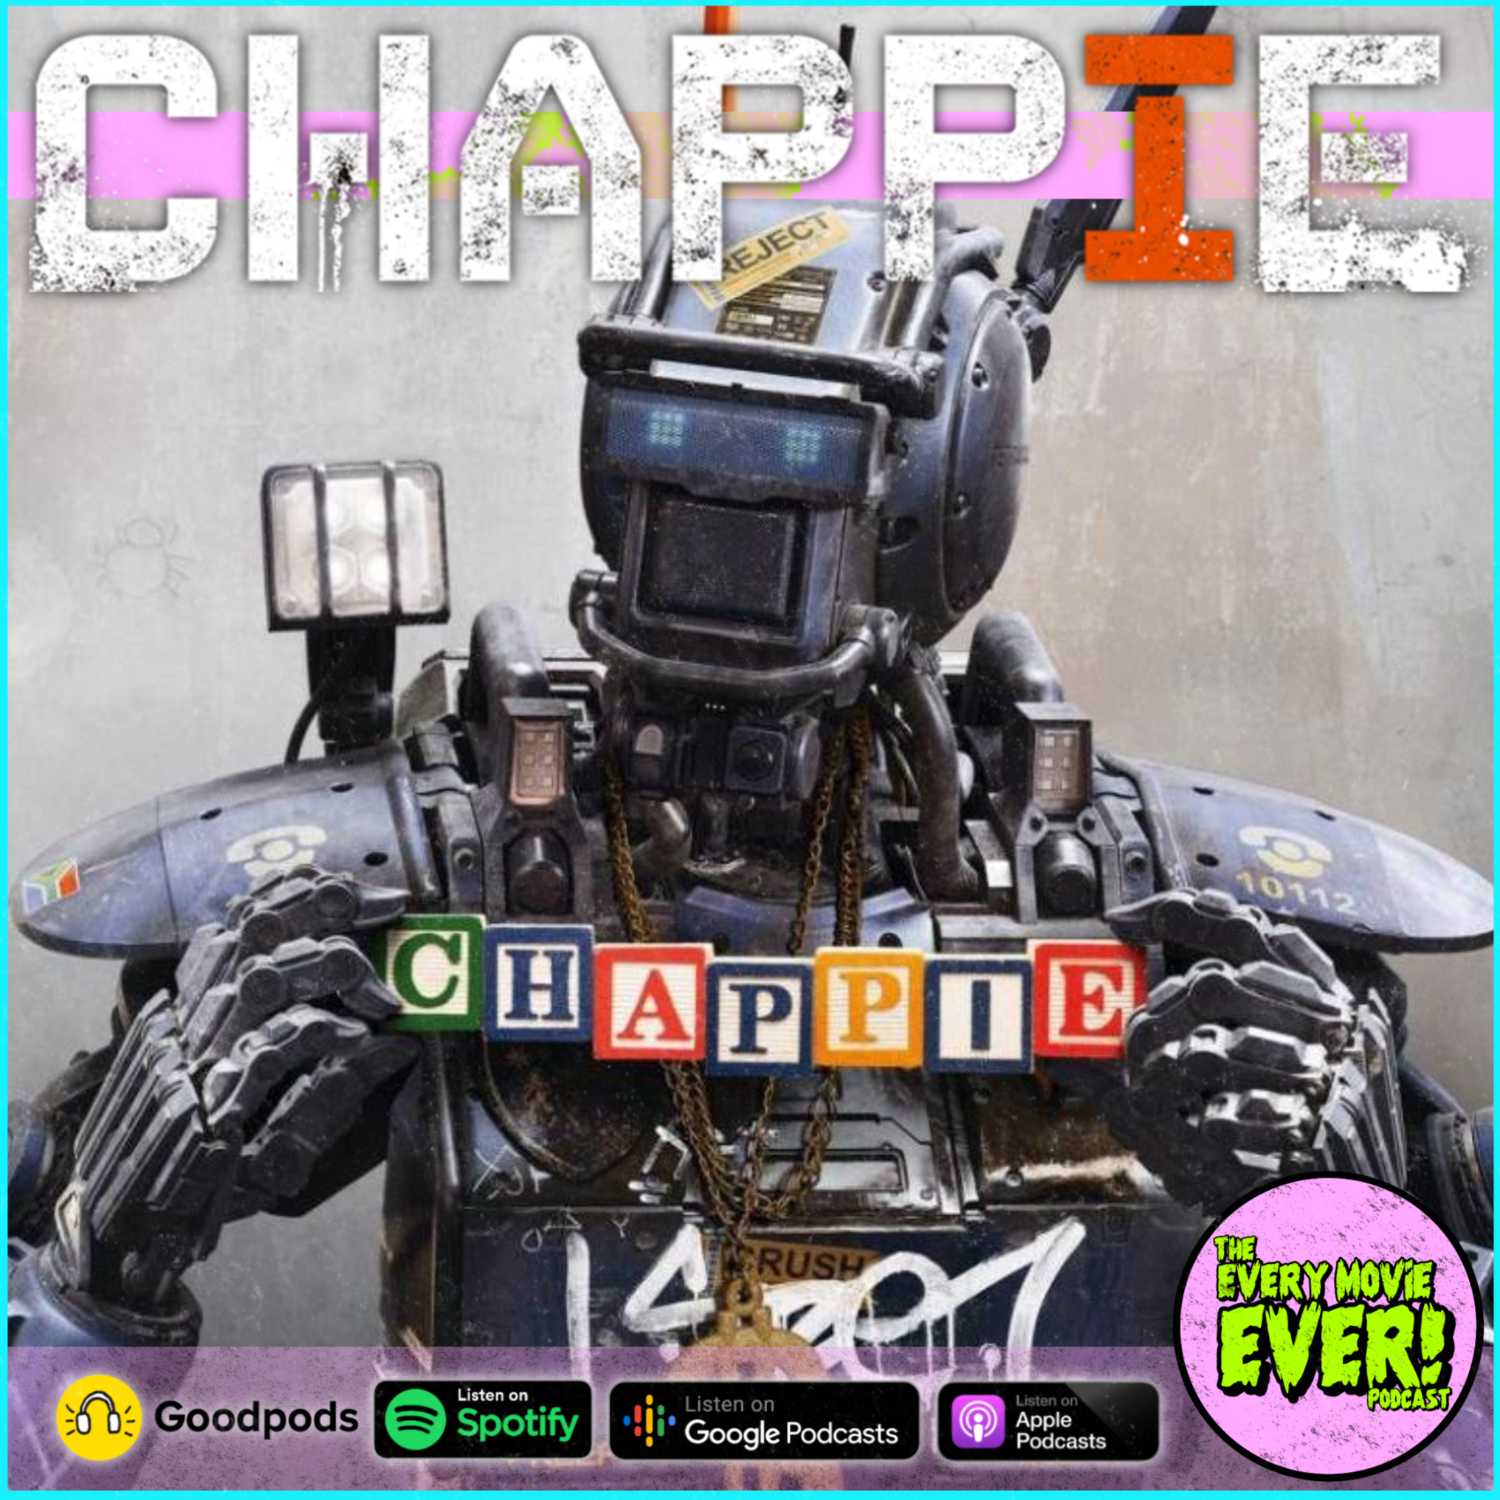 Chappie (2015): Neill Blomkamp’s Curious Construct Conquers Crime, Creates Captivating Chaos & Confronts Cruelty